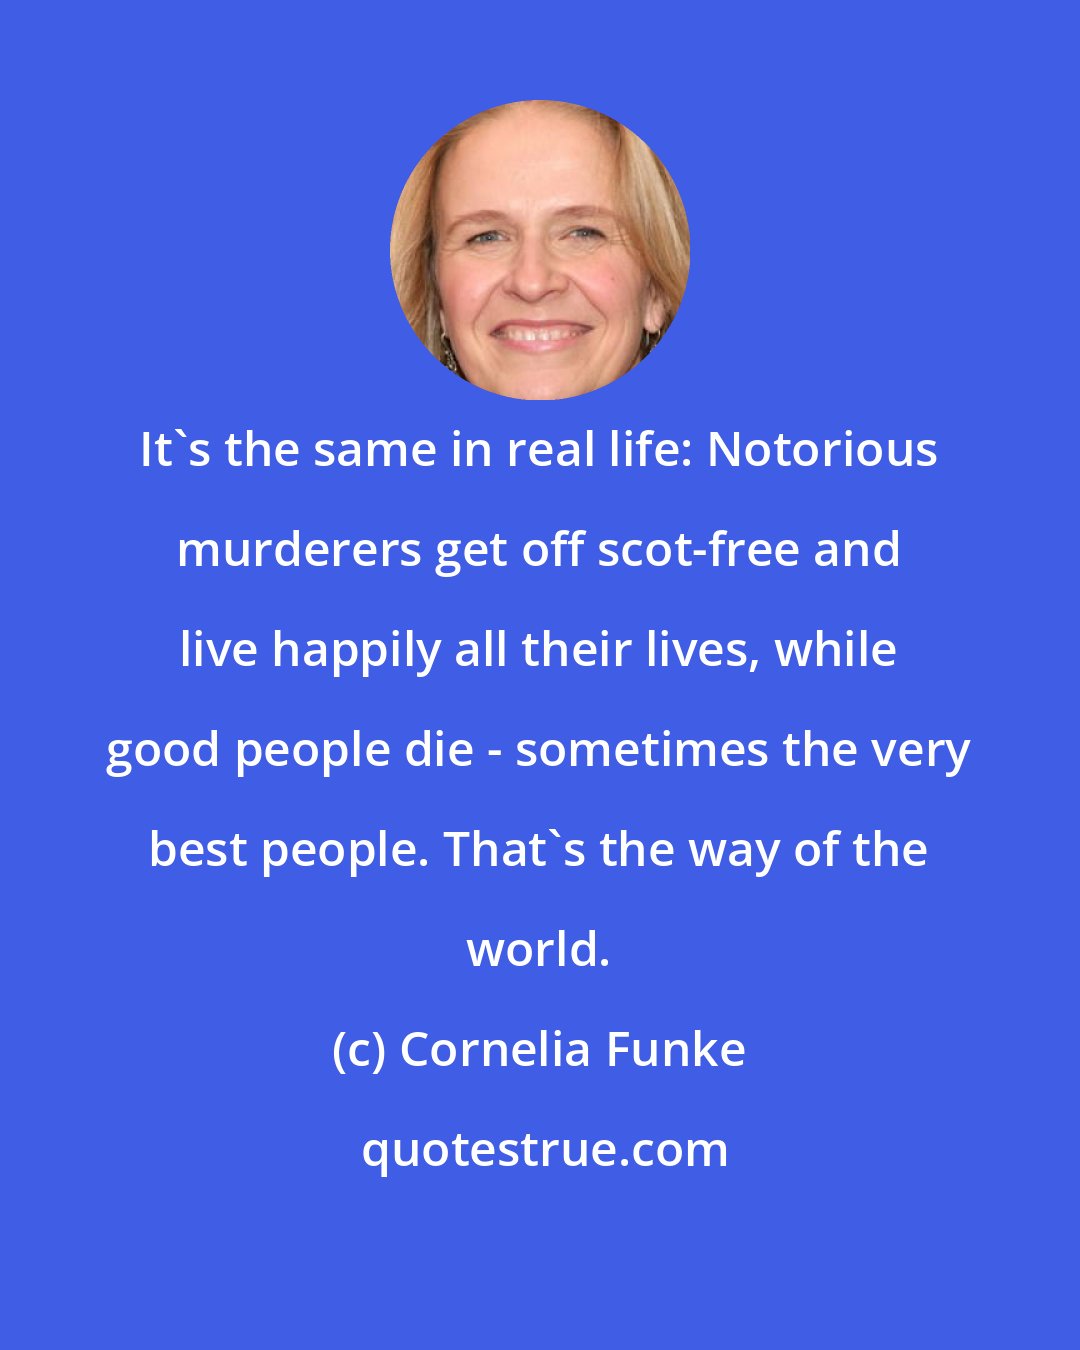 Cornelia Funke: It's the same in real life: Notorious murderers get off scot-free and live happily all their lives, while good people die - sometimes the very best people. That's the way of the world.